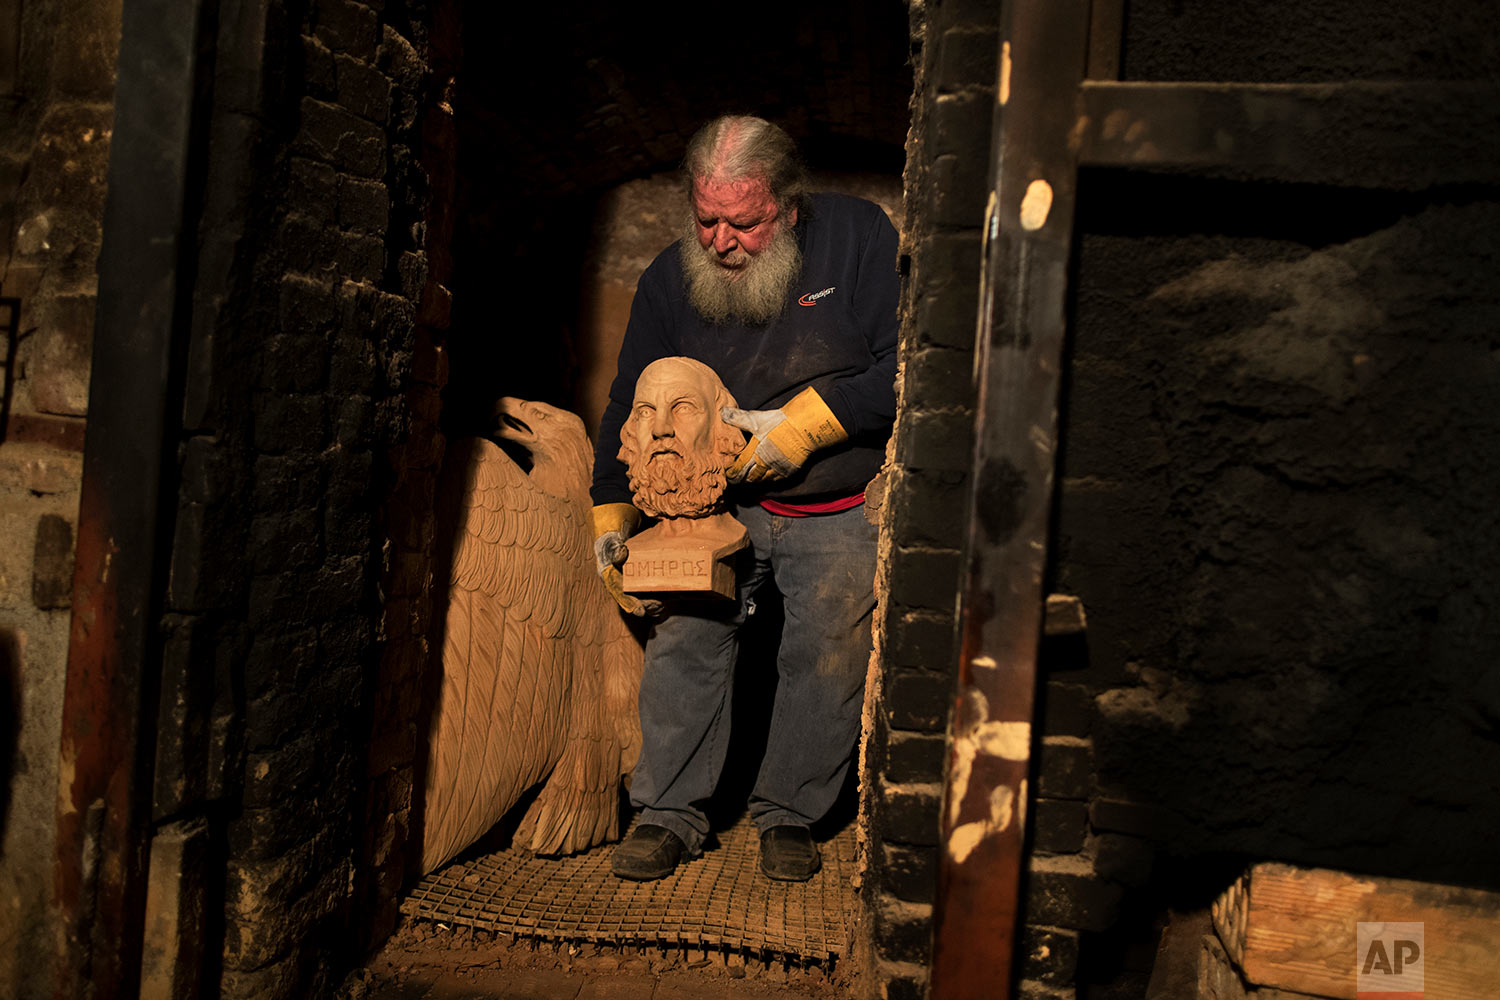  In this Thursday, Dec. 21, 2017 sculptor and ceramicist Haralambos Goumas carries out of a furnace the bust of Homer, whom Greek tradition named as the author of the Iliad and Odyssey epics, at his workshop in the Egaleo suburb of Athens. (AP Photo/